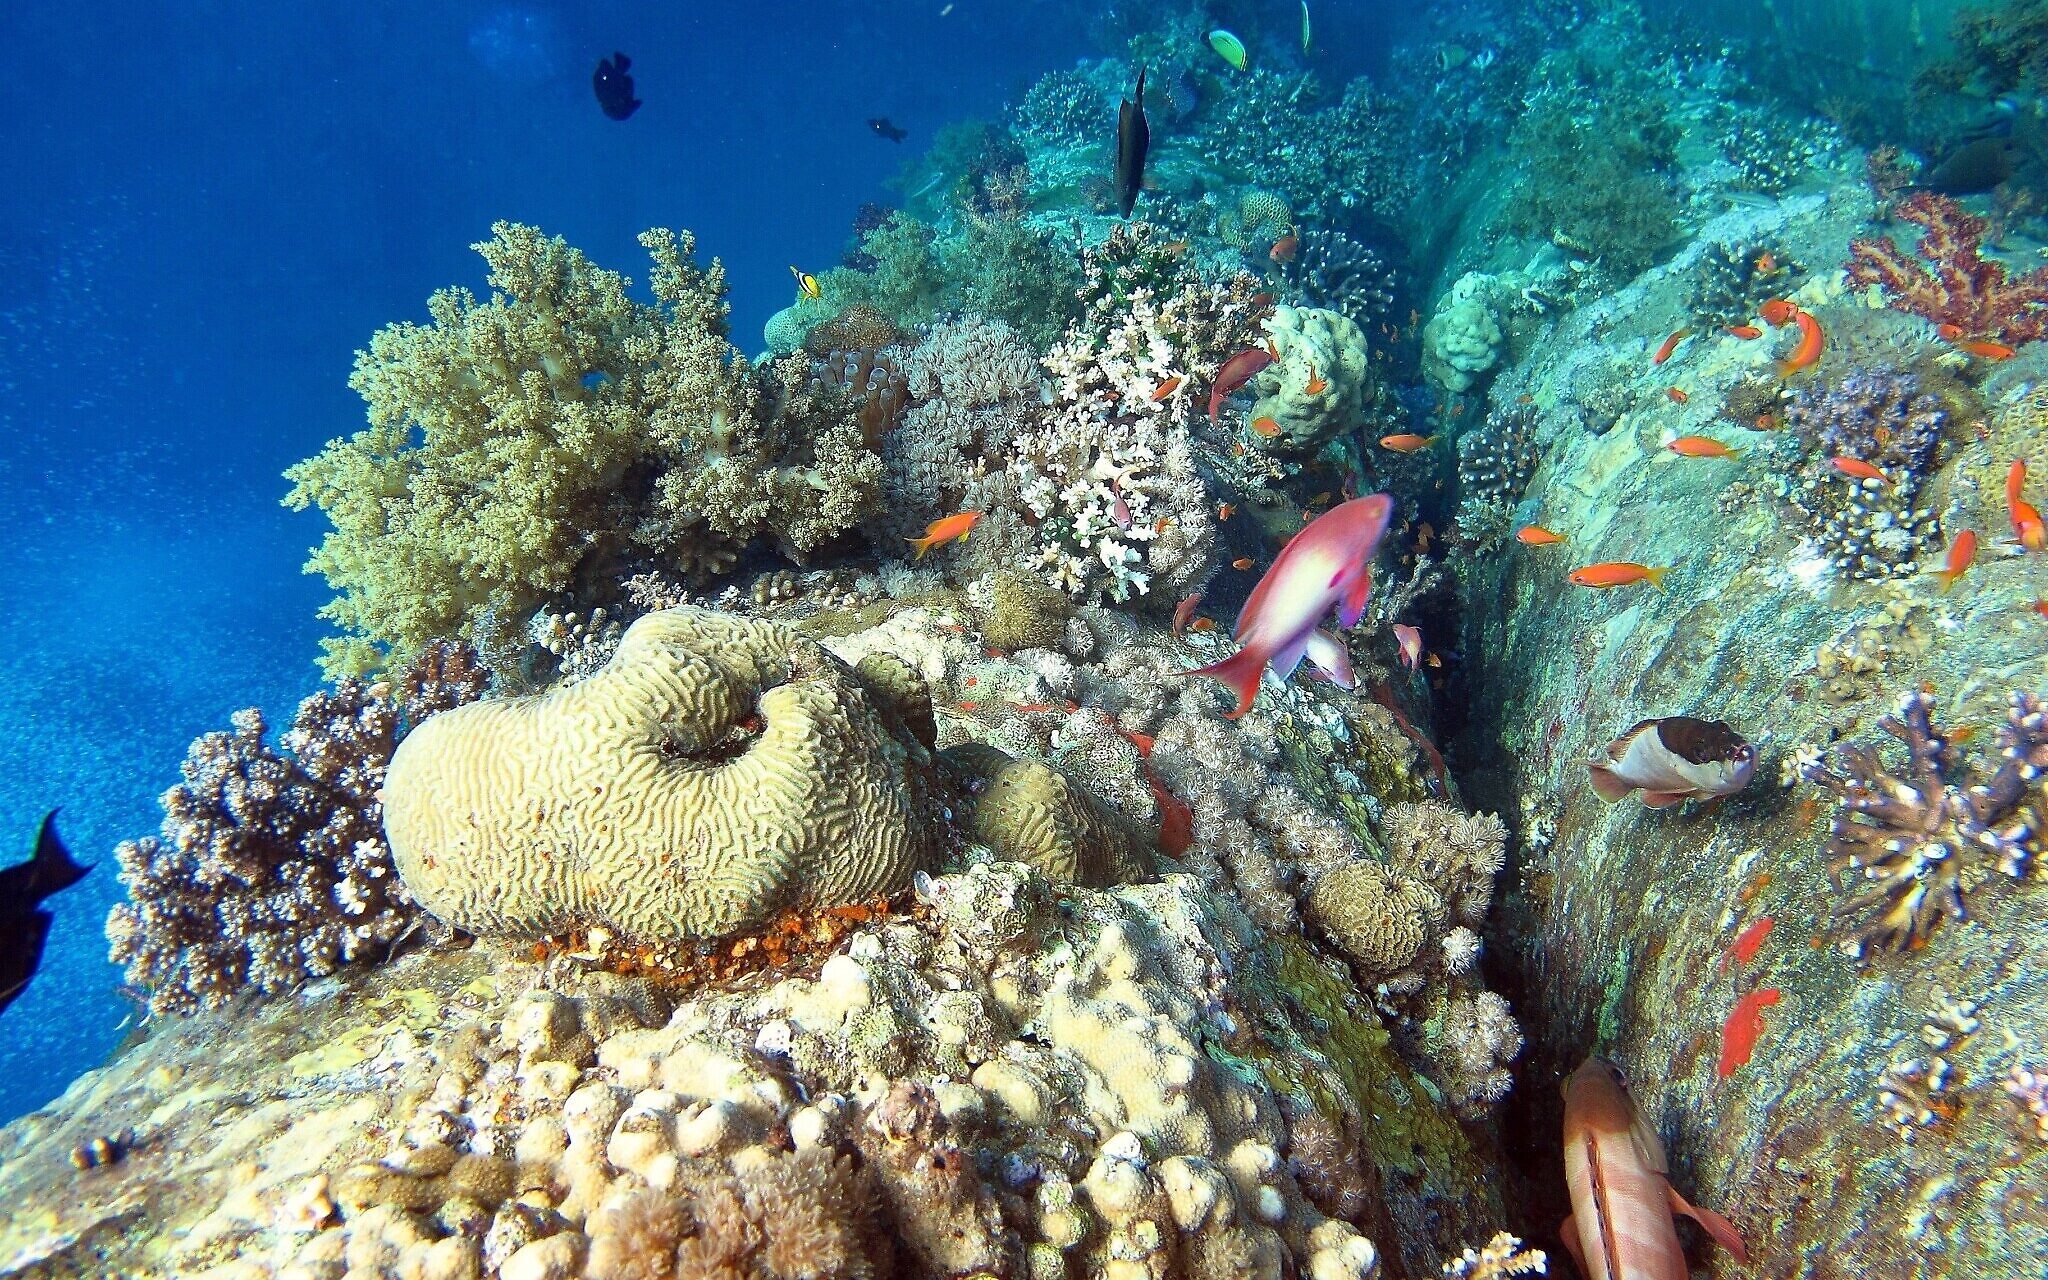 Eilat Ashkelon Pipeline Company found of damaging coral reefs | The Times of Israel